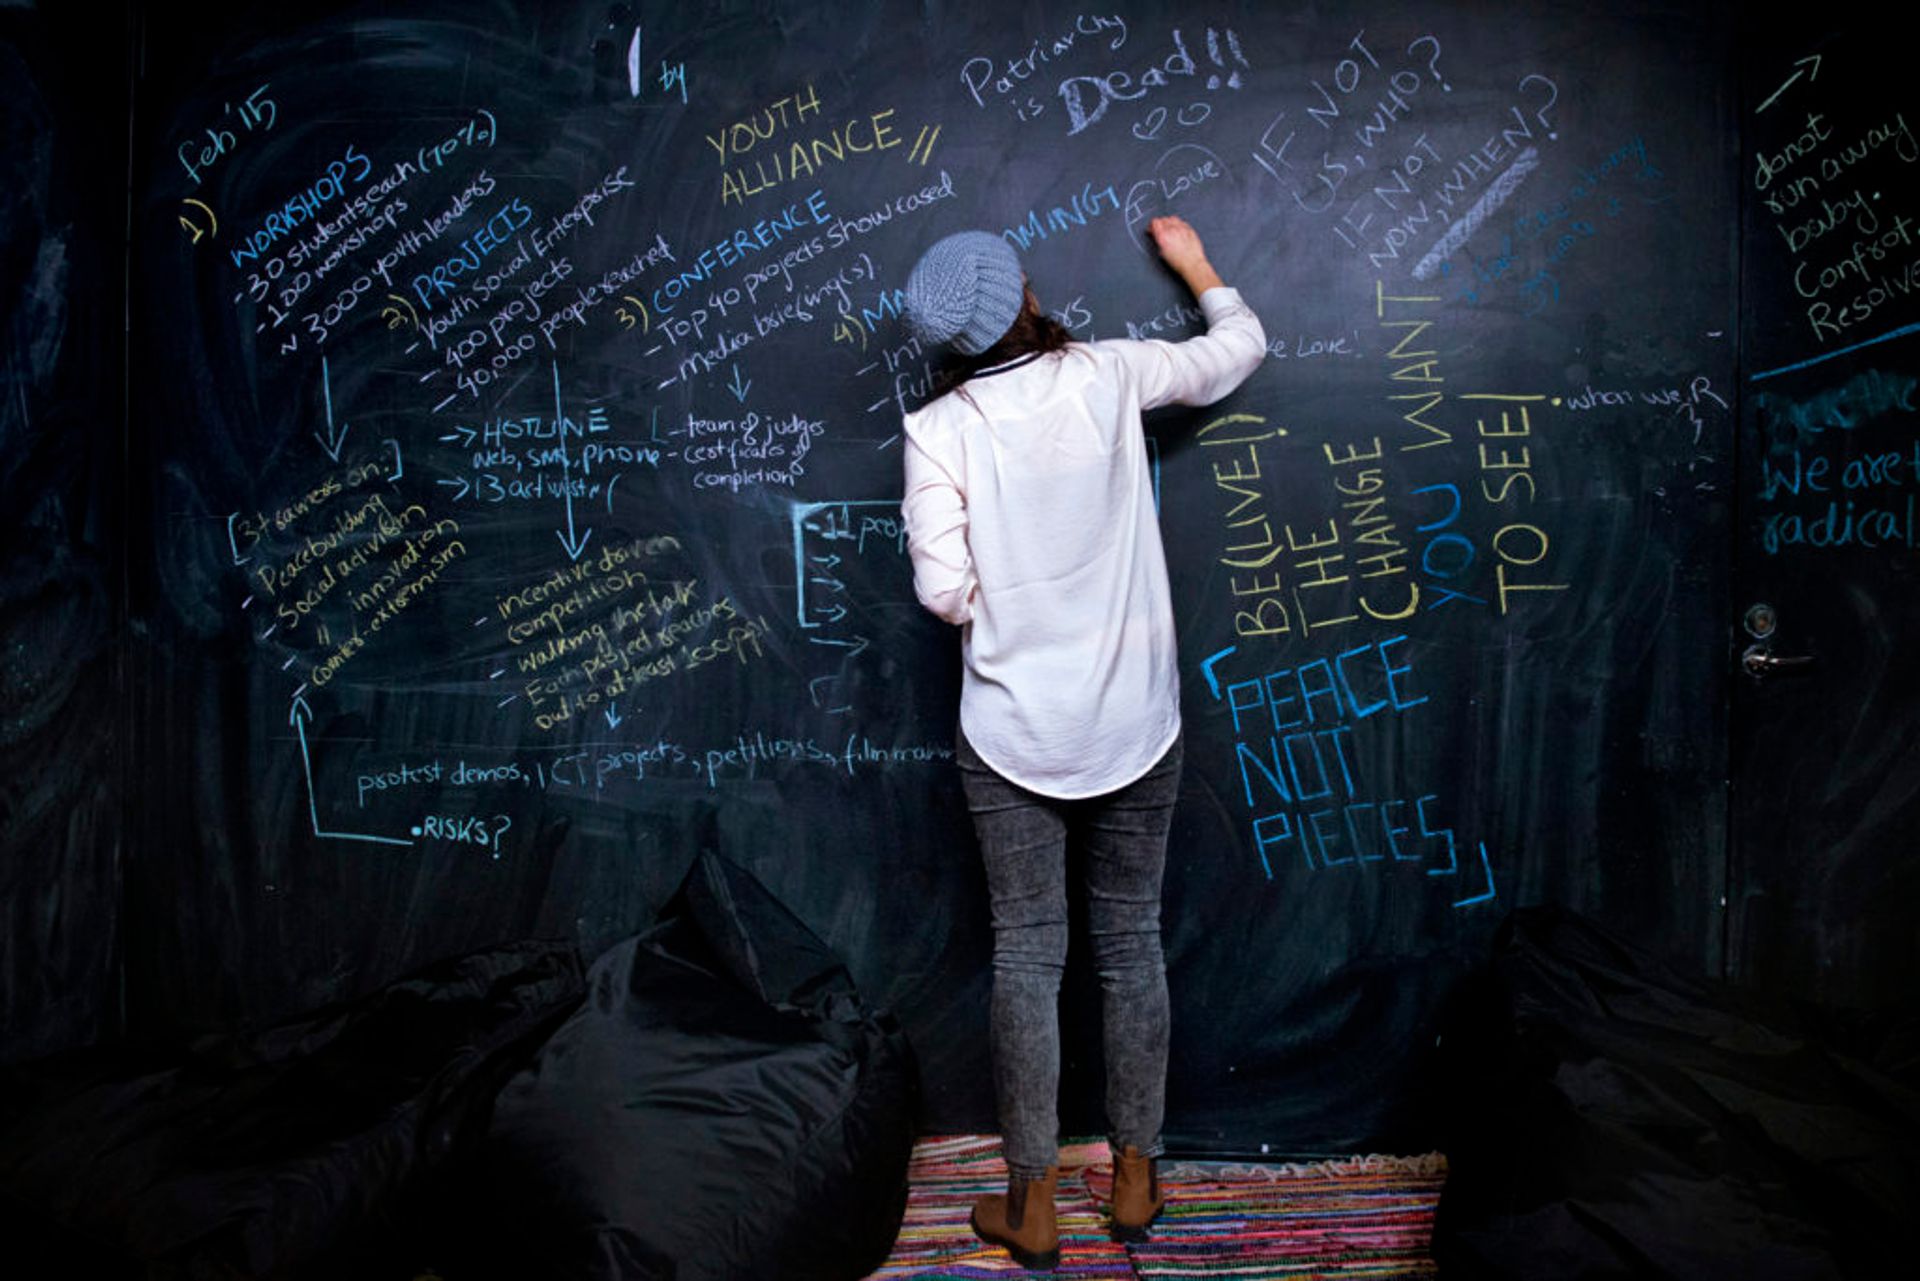 A social sciences student writes in chalk on a blackboard.